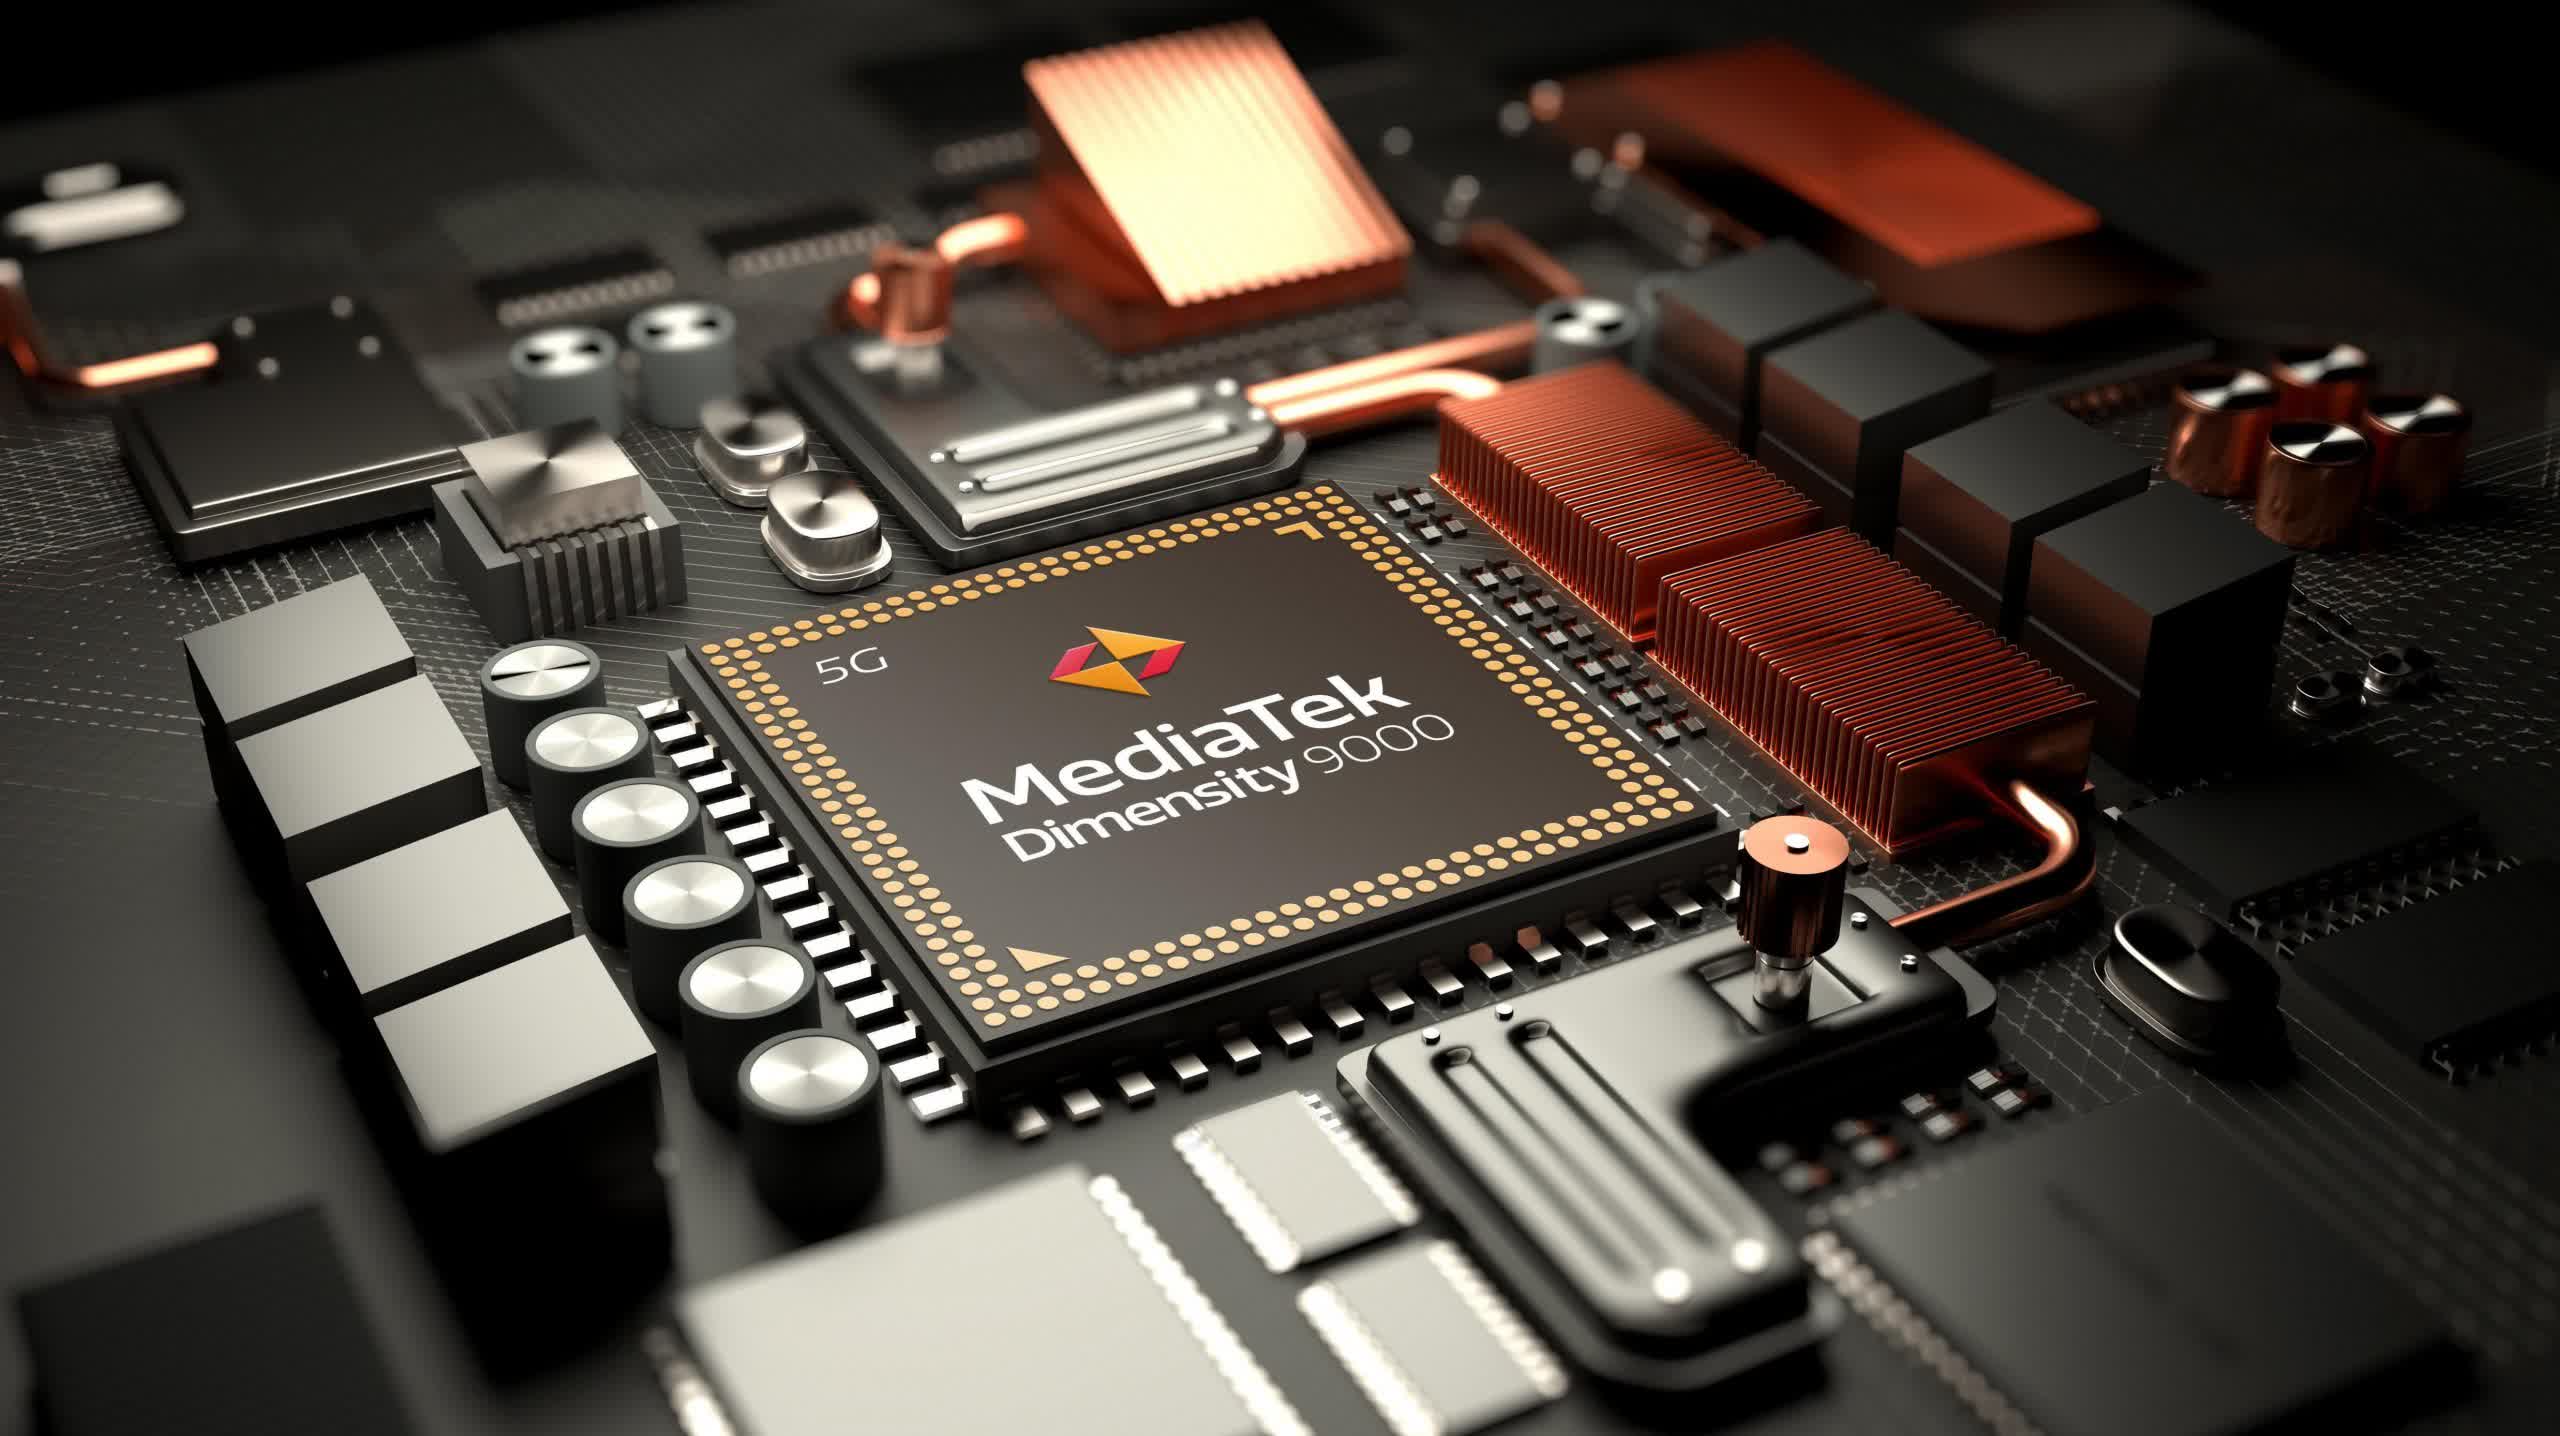 MediaTek says its Dimensity 9000 SoC is ready to power the next generation of flagship phones